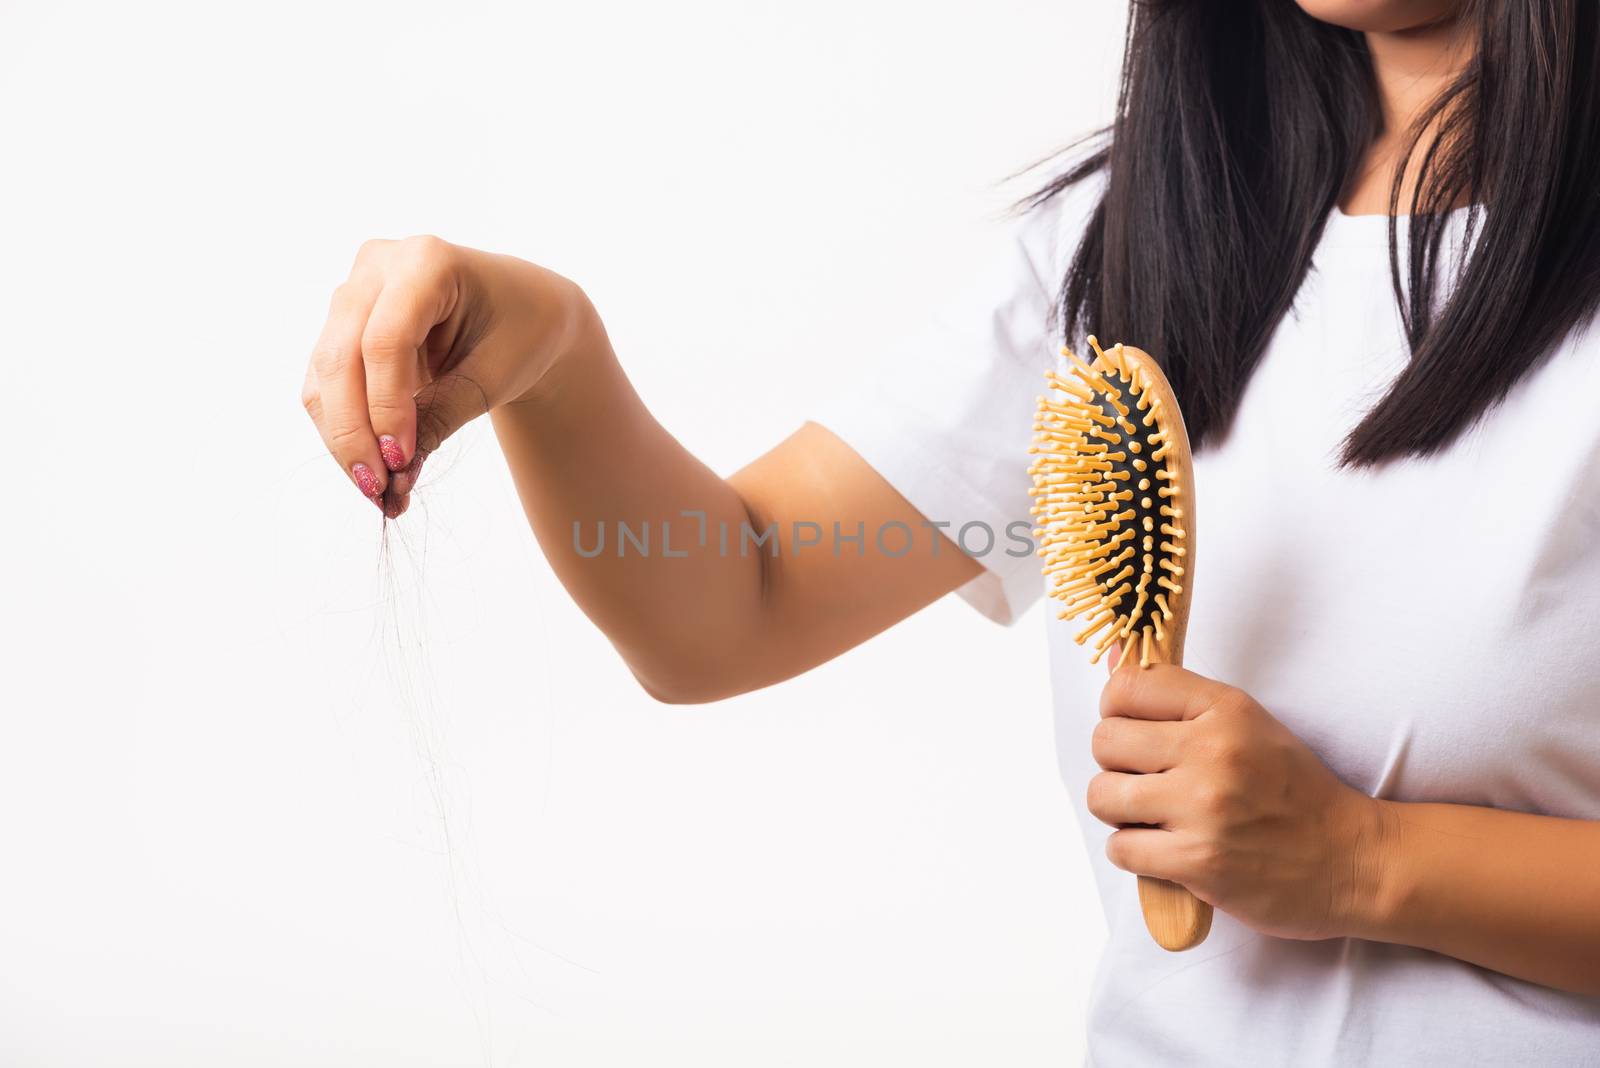 Asian woman unhappy weak hair problem her hold hairbrush with damaged long loss hair in the comb brush she pulls loss hair from the brush, isolated on white background, Medicine health care concept